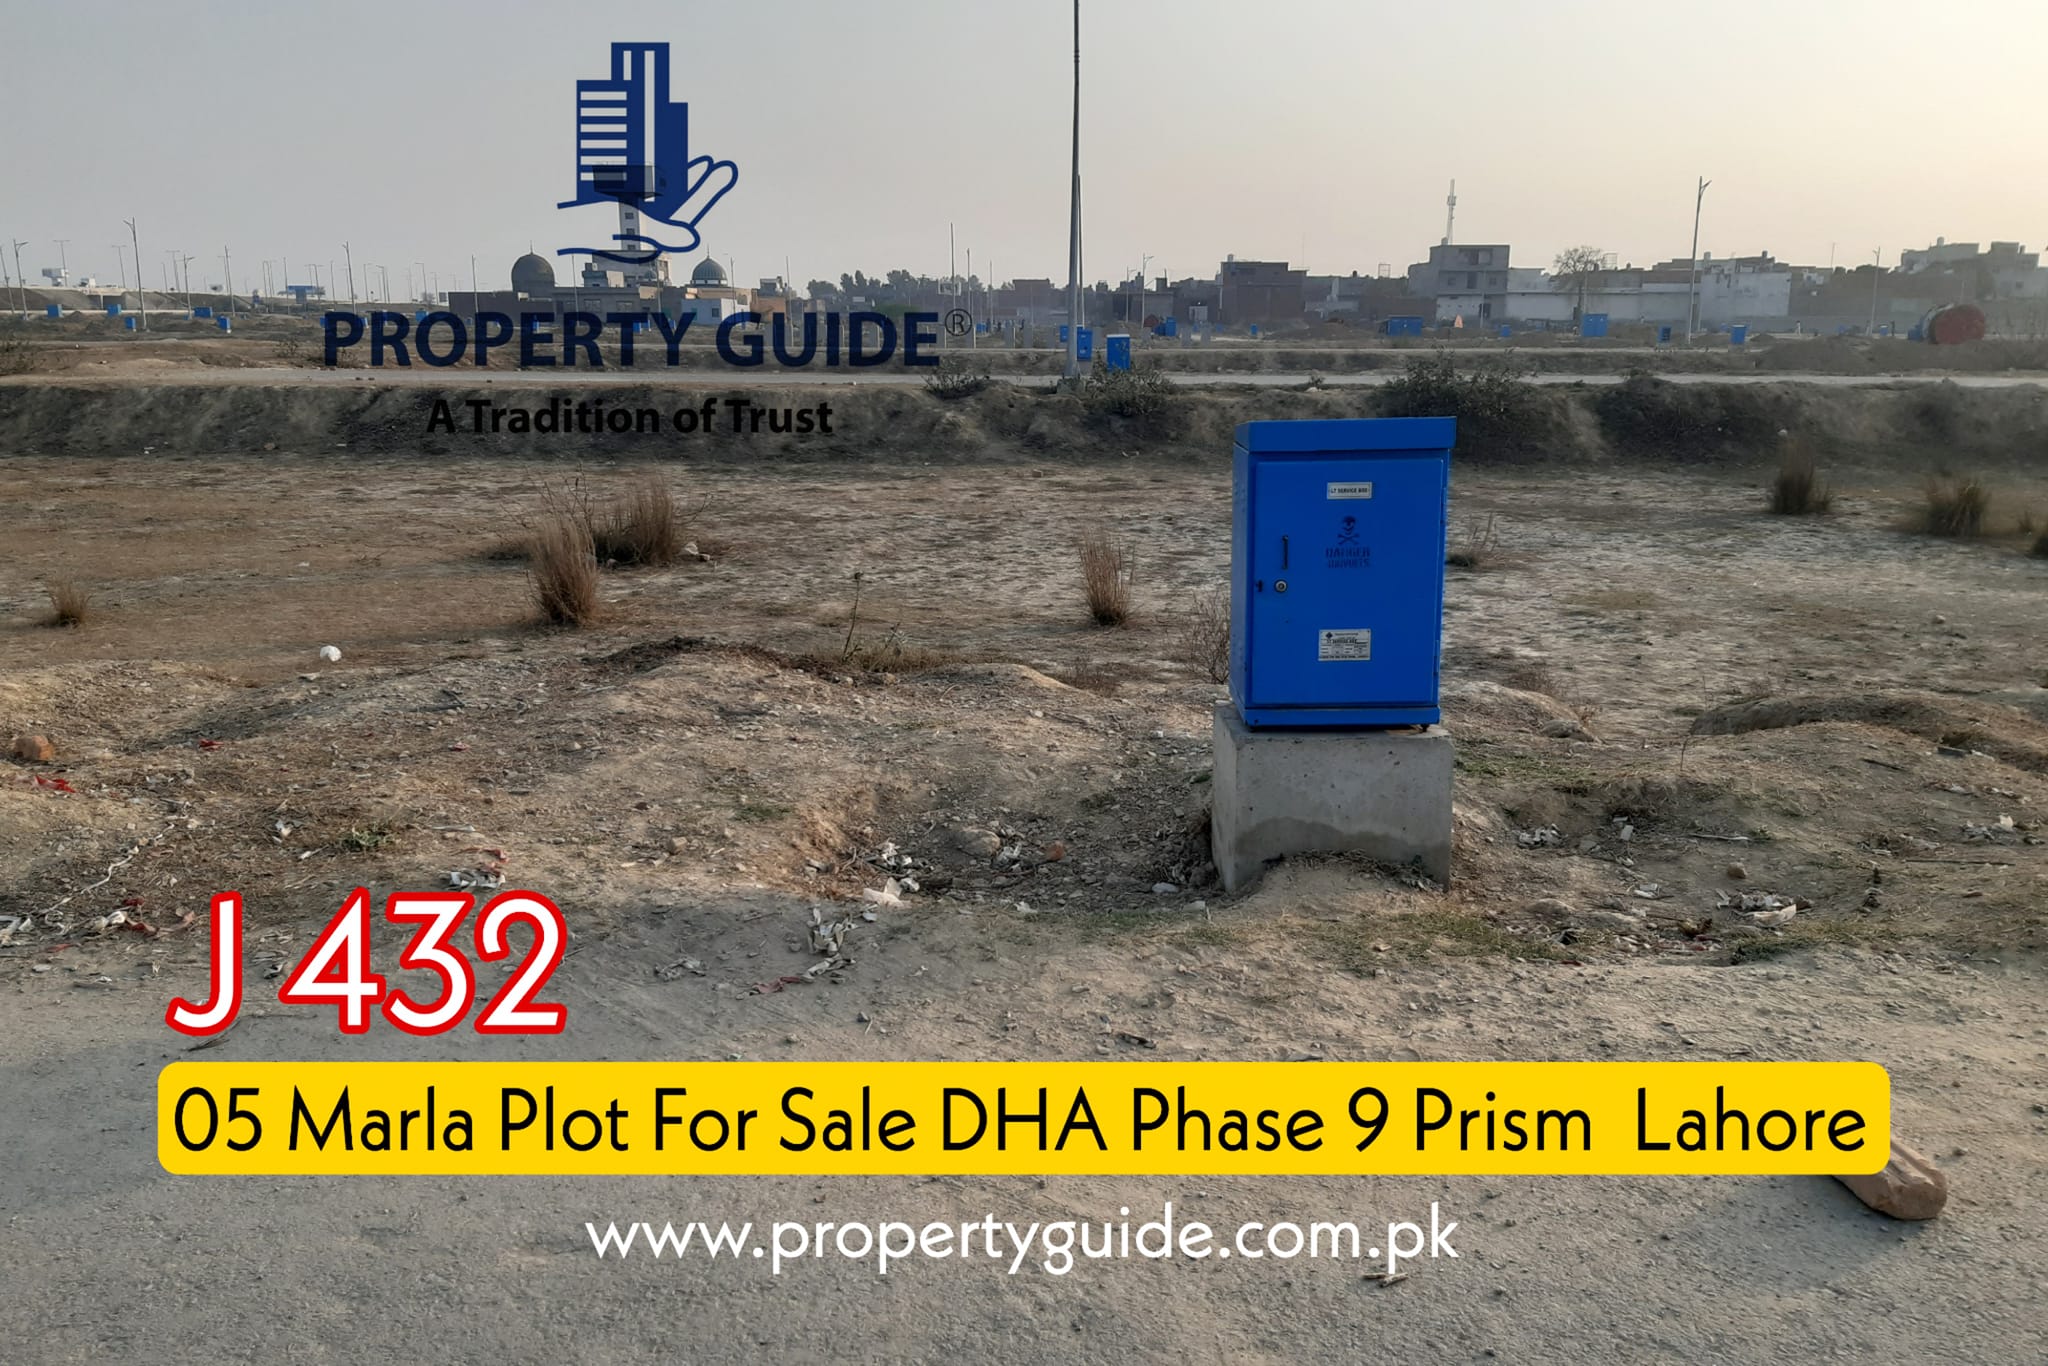 Prism DHA Phase 9 Lahore Plot For Sale